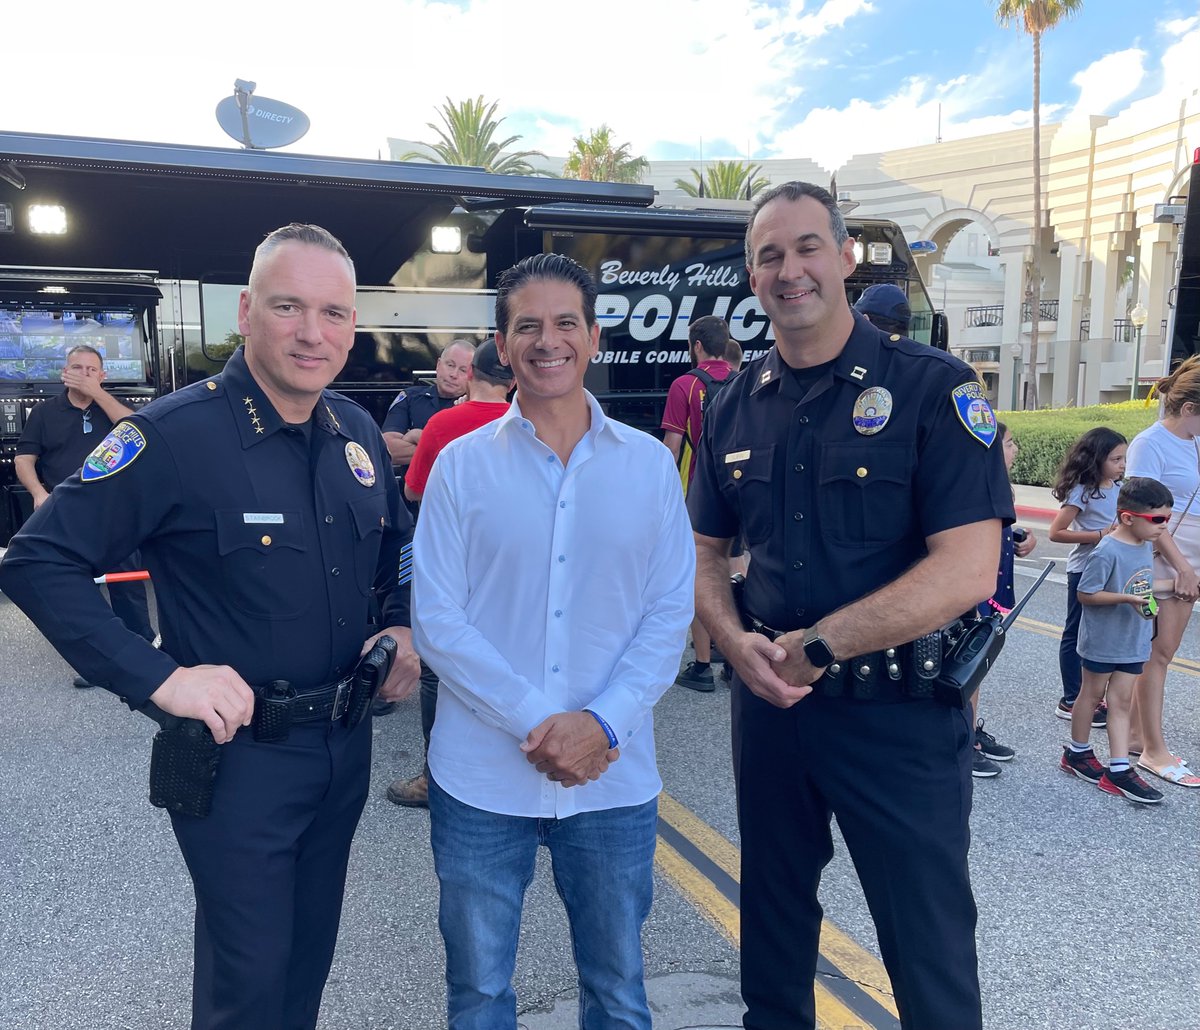 #NationalNightOut in Beverly Hills with Chief Mark Stainbrook and Captain Max Subin. 

Good leaders support and work with law enforcement and bring law enforcement and the community together for a better and safer Los Angeles.